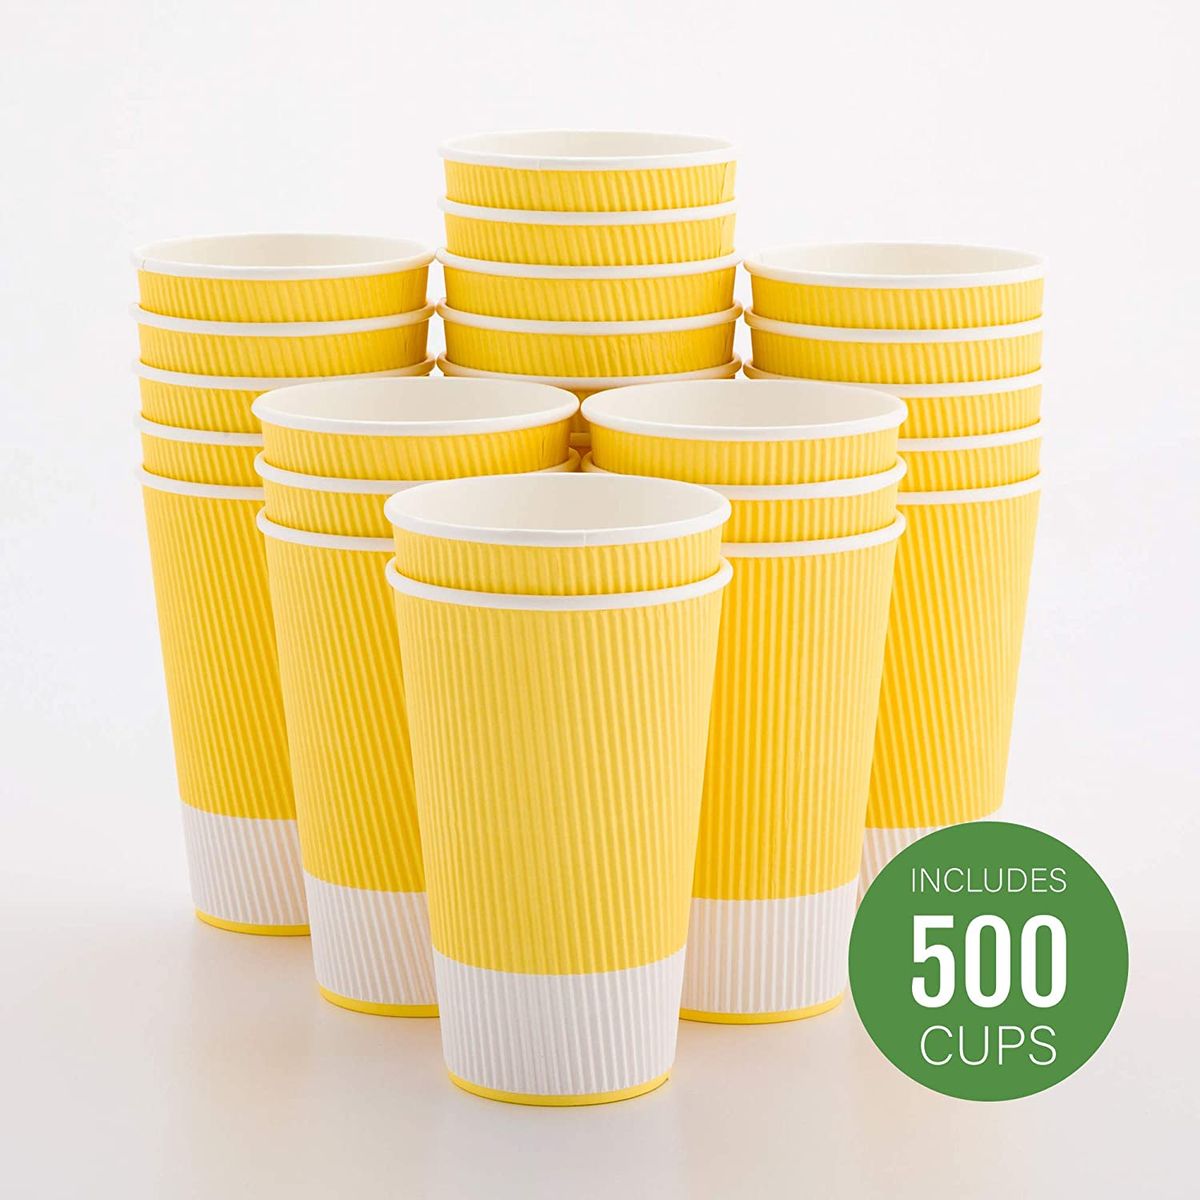 12 oz Gray Paper Coffee Cup - Ripple Wall - 3 1/2 x 3 1/2 x 4 1/4 - 500  count box